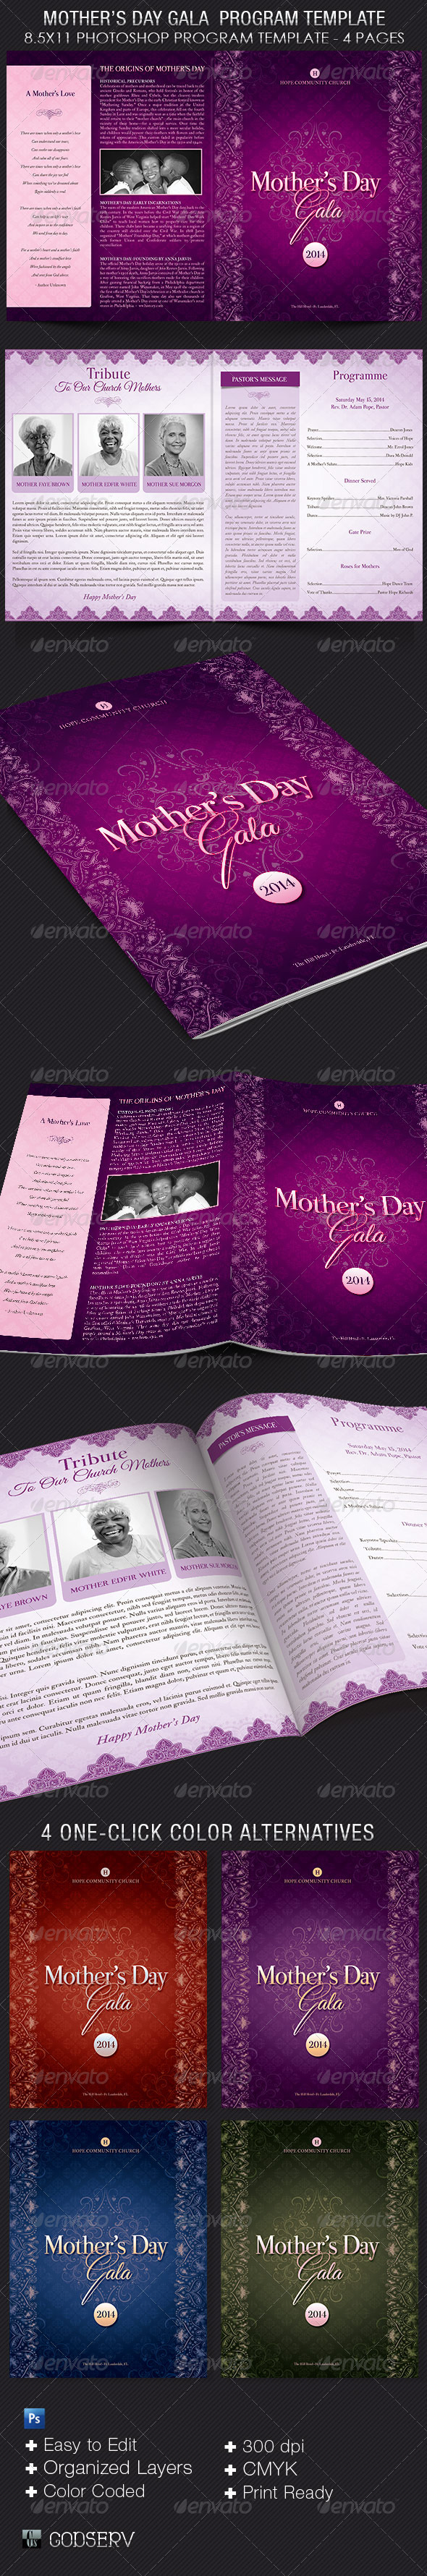 GraphicRiver Mother's Day Gala Program Template 7699495